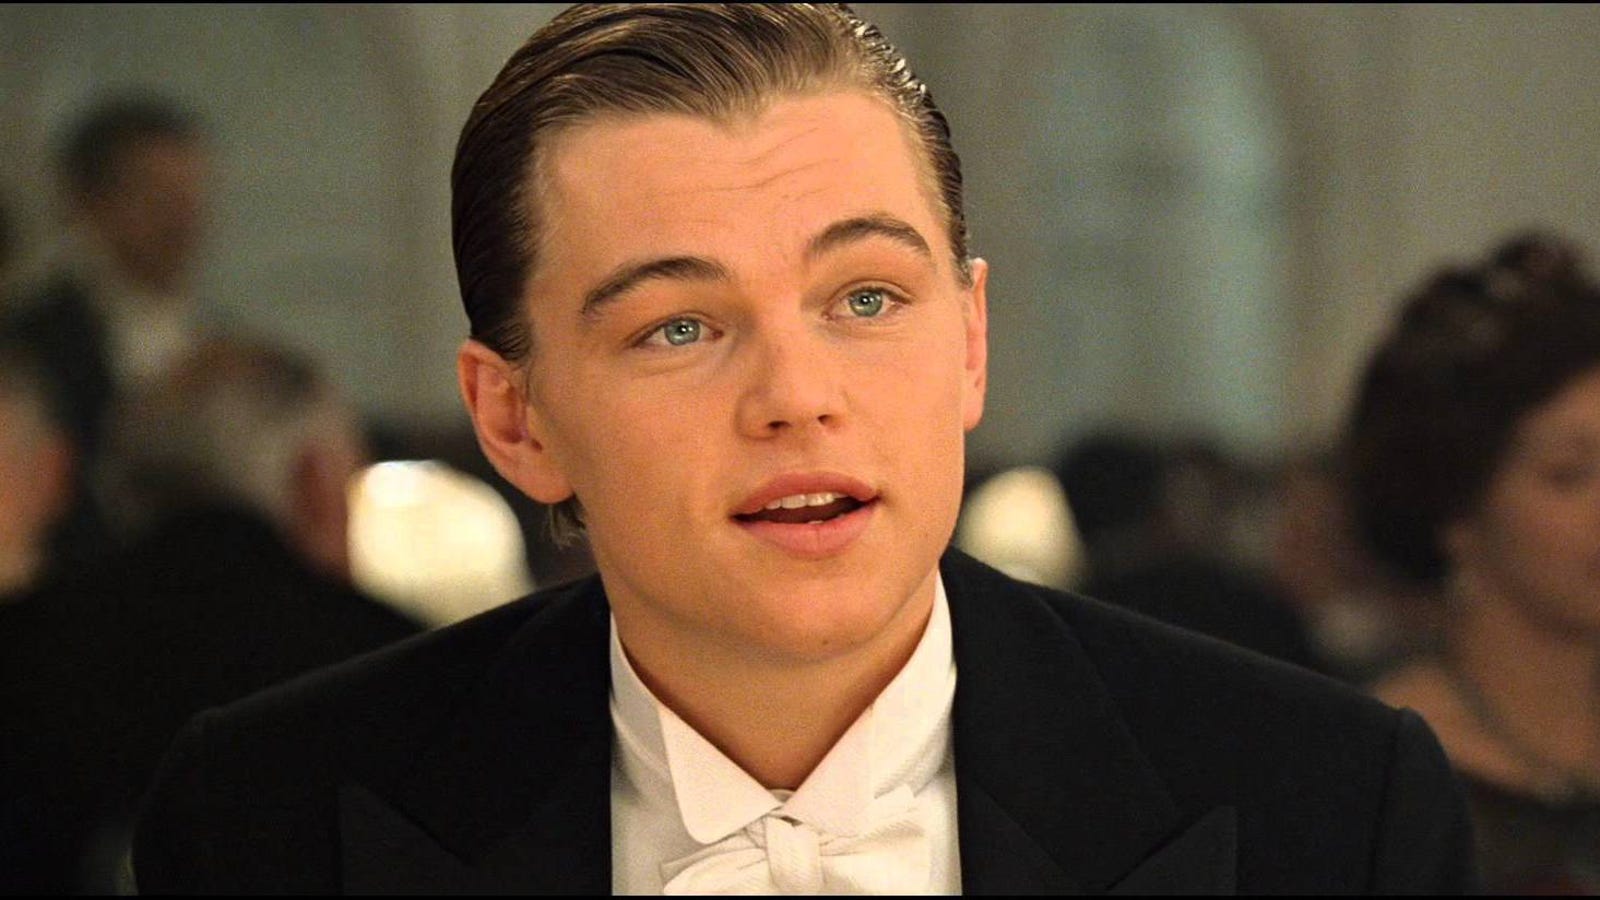 Leonardo DiCaprio Thought His Role in Titanic Would Be 'Too Easy'1600 x 900